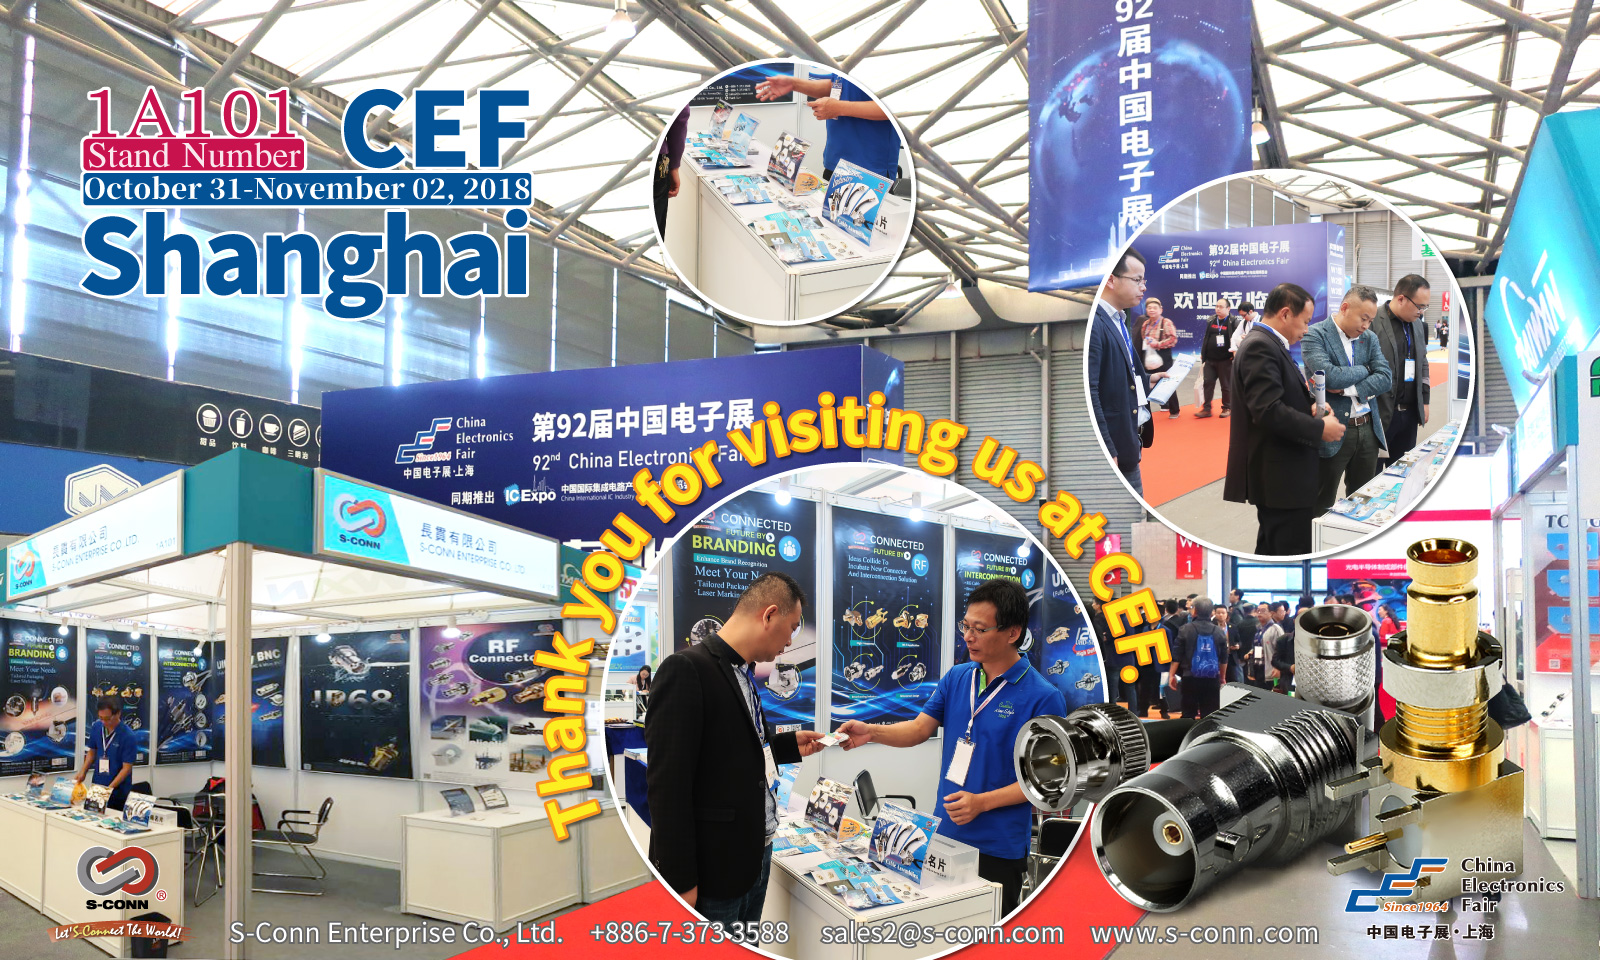 2018 China Electronics Fair ：Thanks for your visiting.